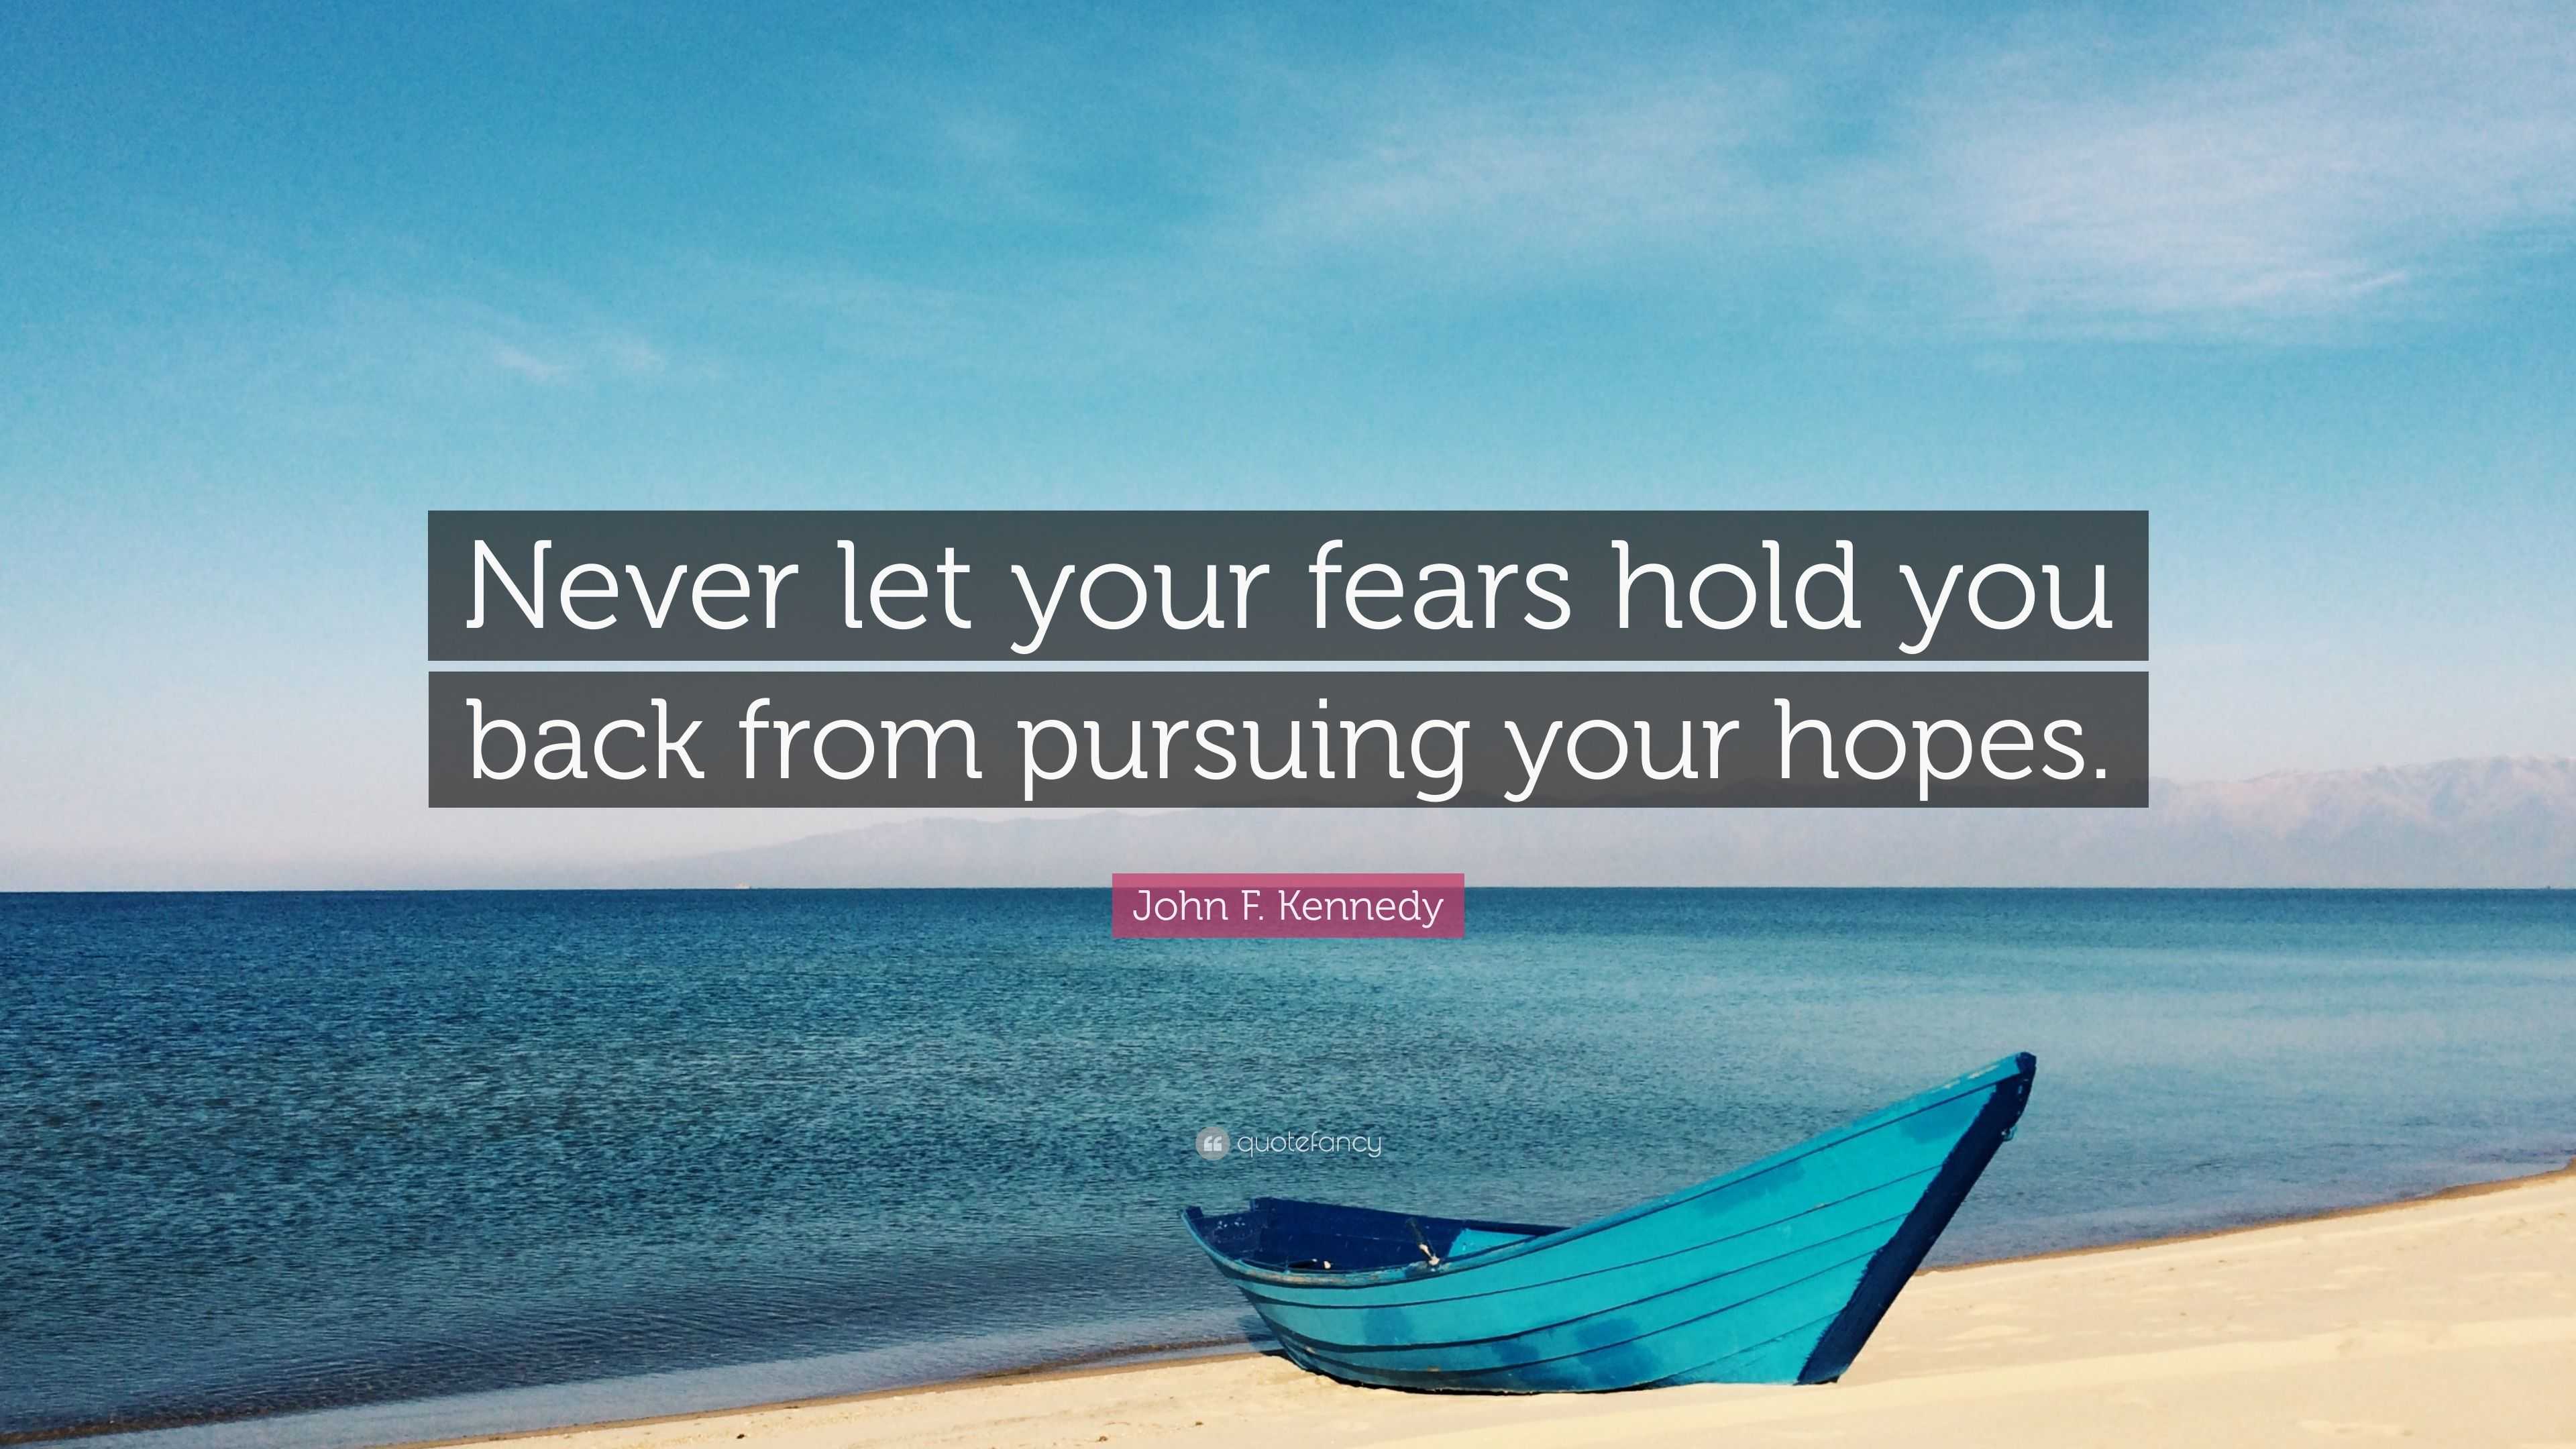 John F Kennedy Quote “never Let Your Fears Hold You Back From